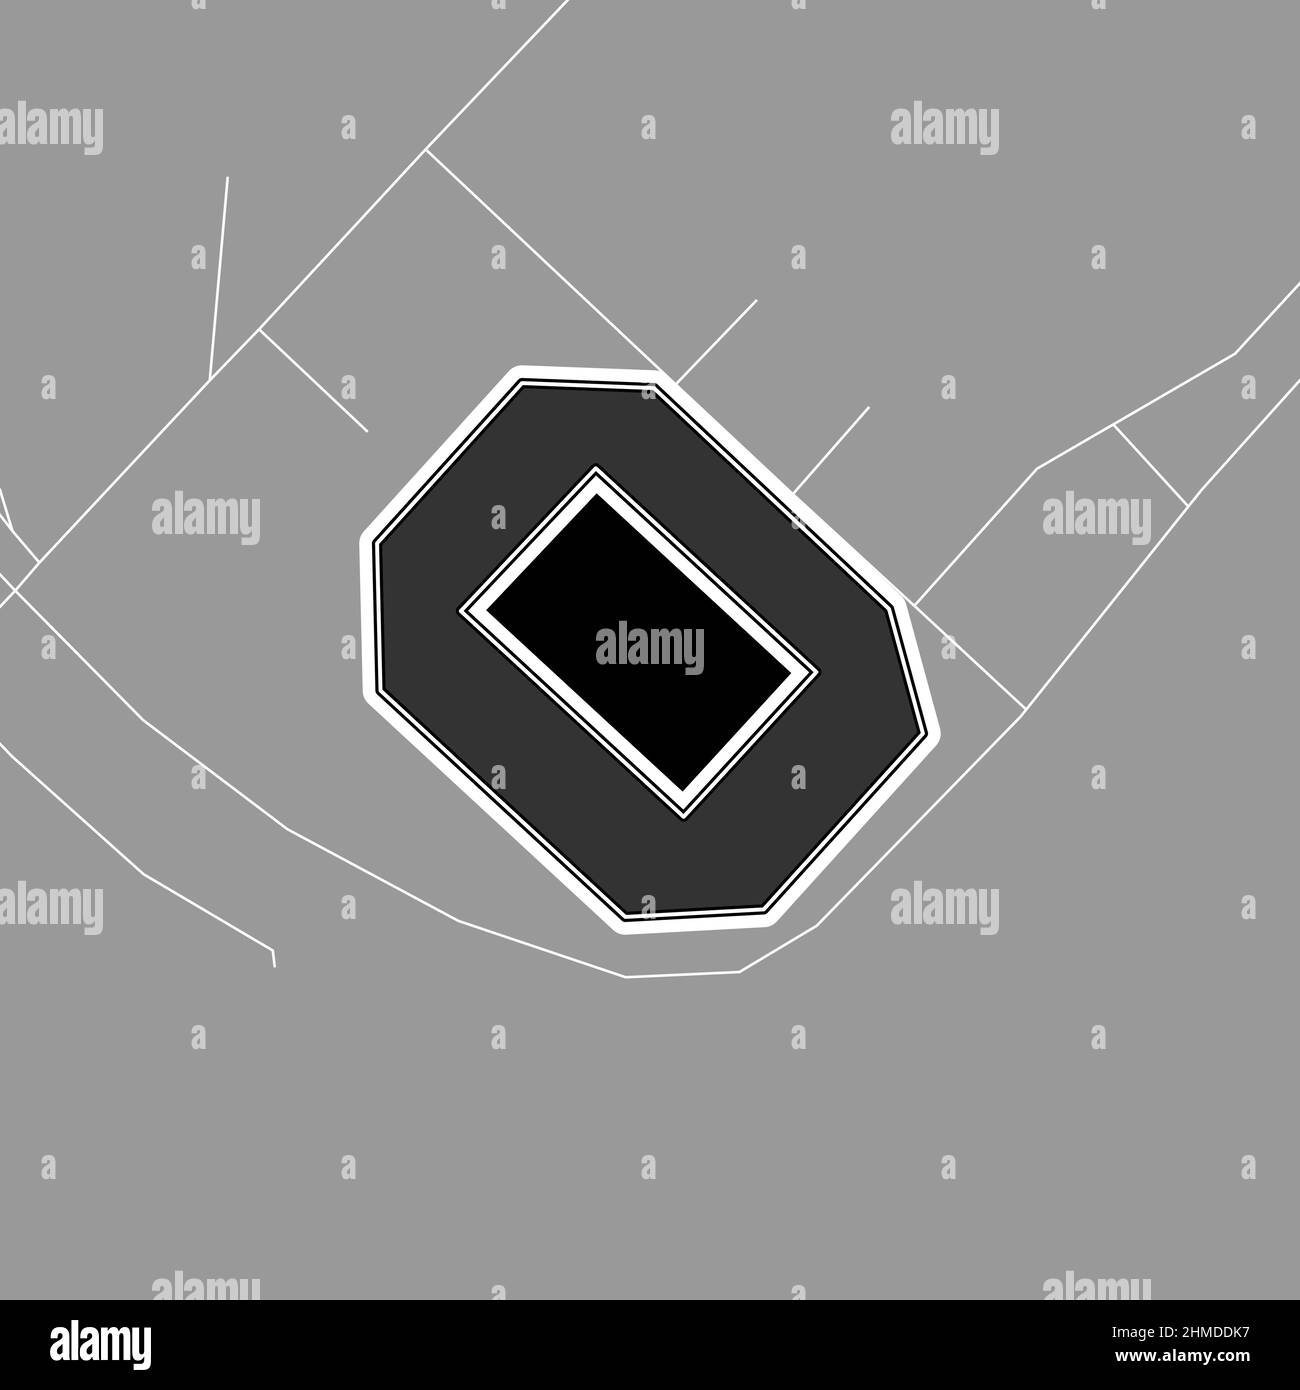 Avellaneda, Baseball MLB Stadium, outline vector map. The baseball statium map was drawn with white areas and lines for main roads, side roads. Stock Vector